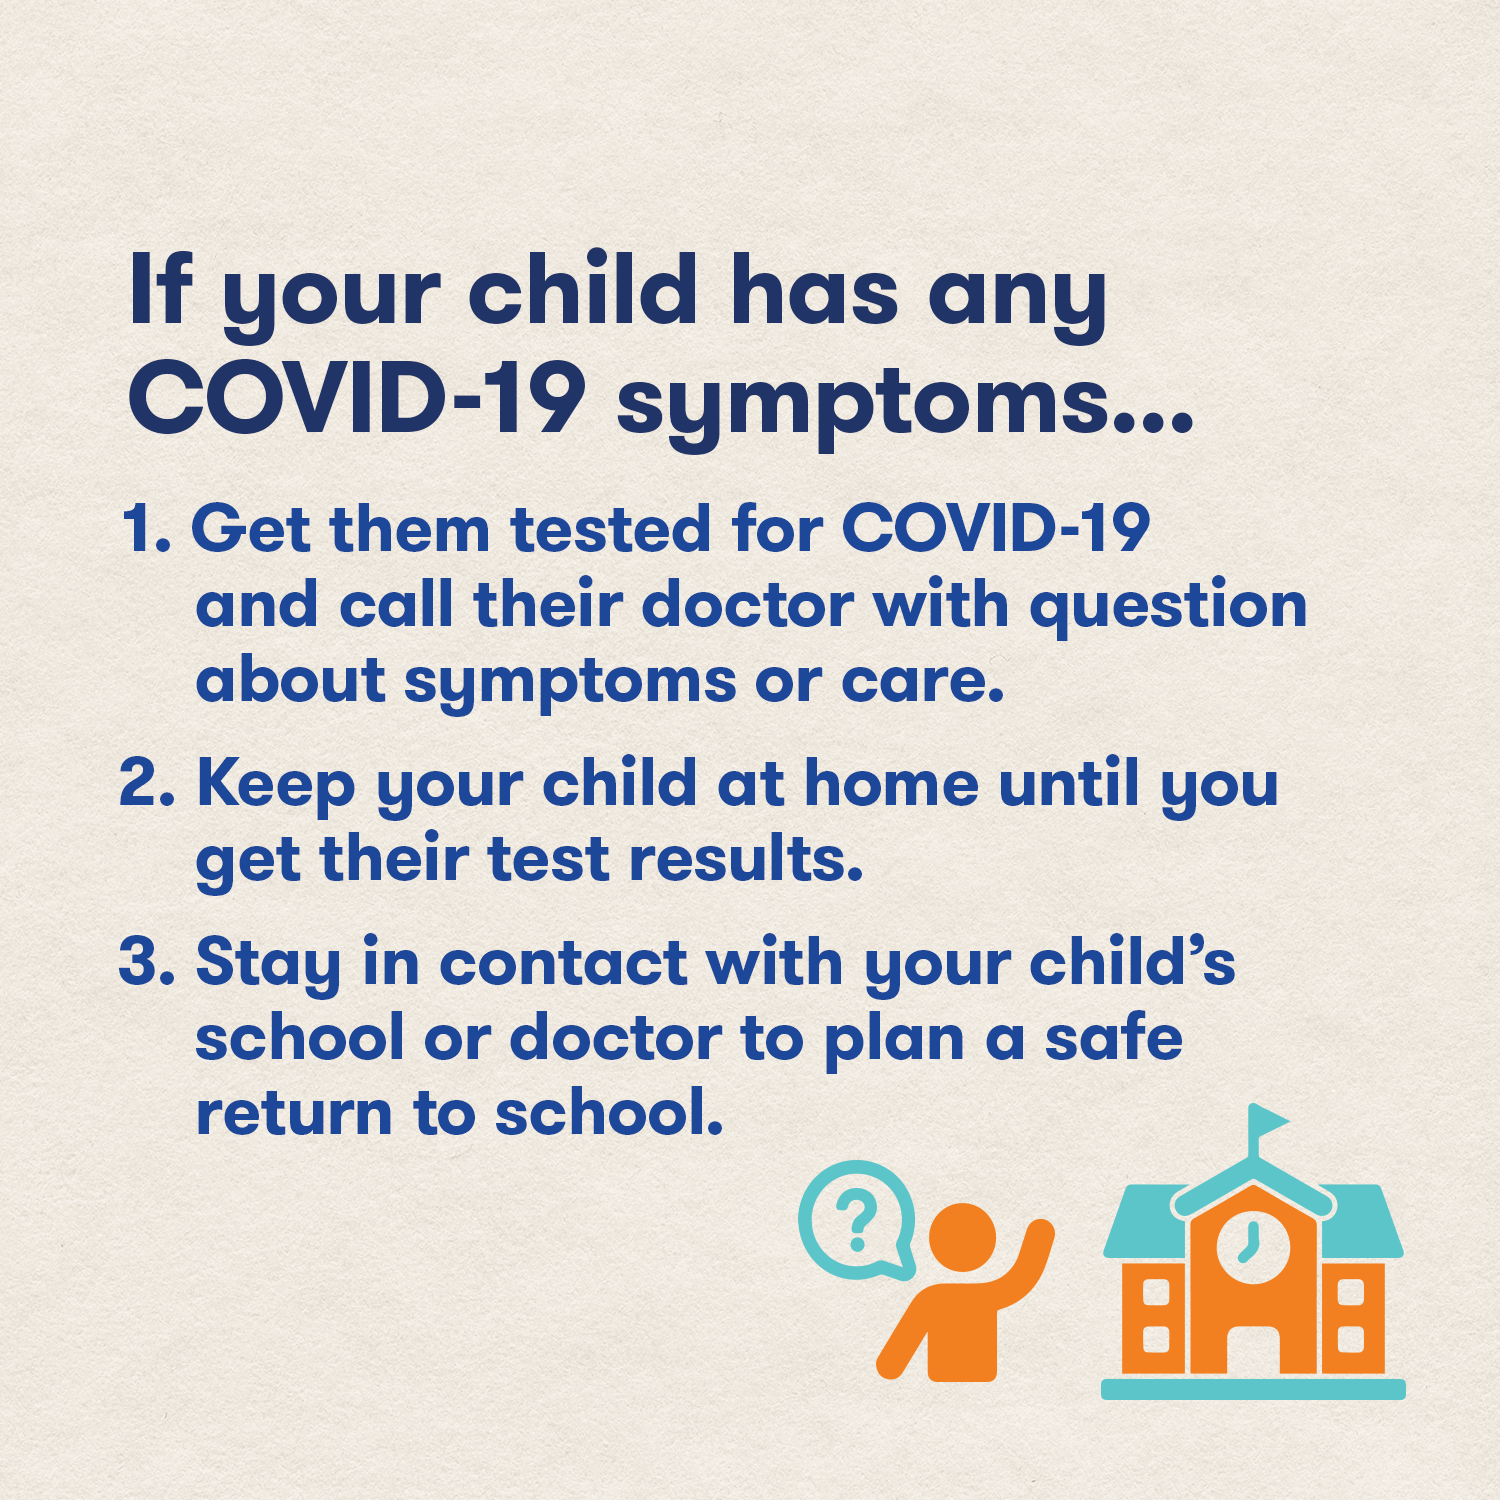 If your child has symptoms get them tested, keep them home until you get their test results, stay in contact with their schooll